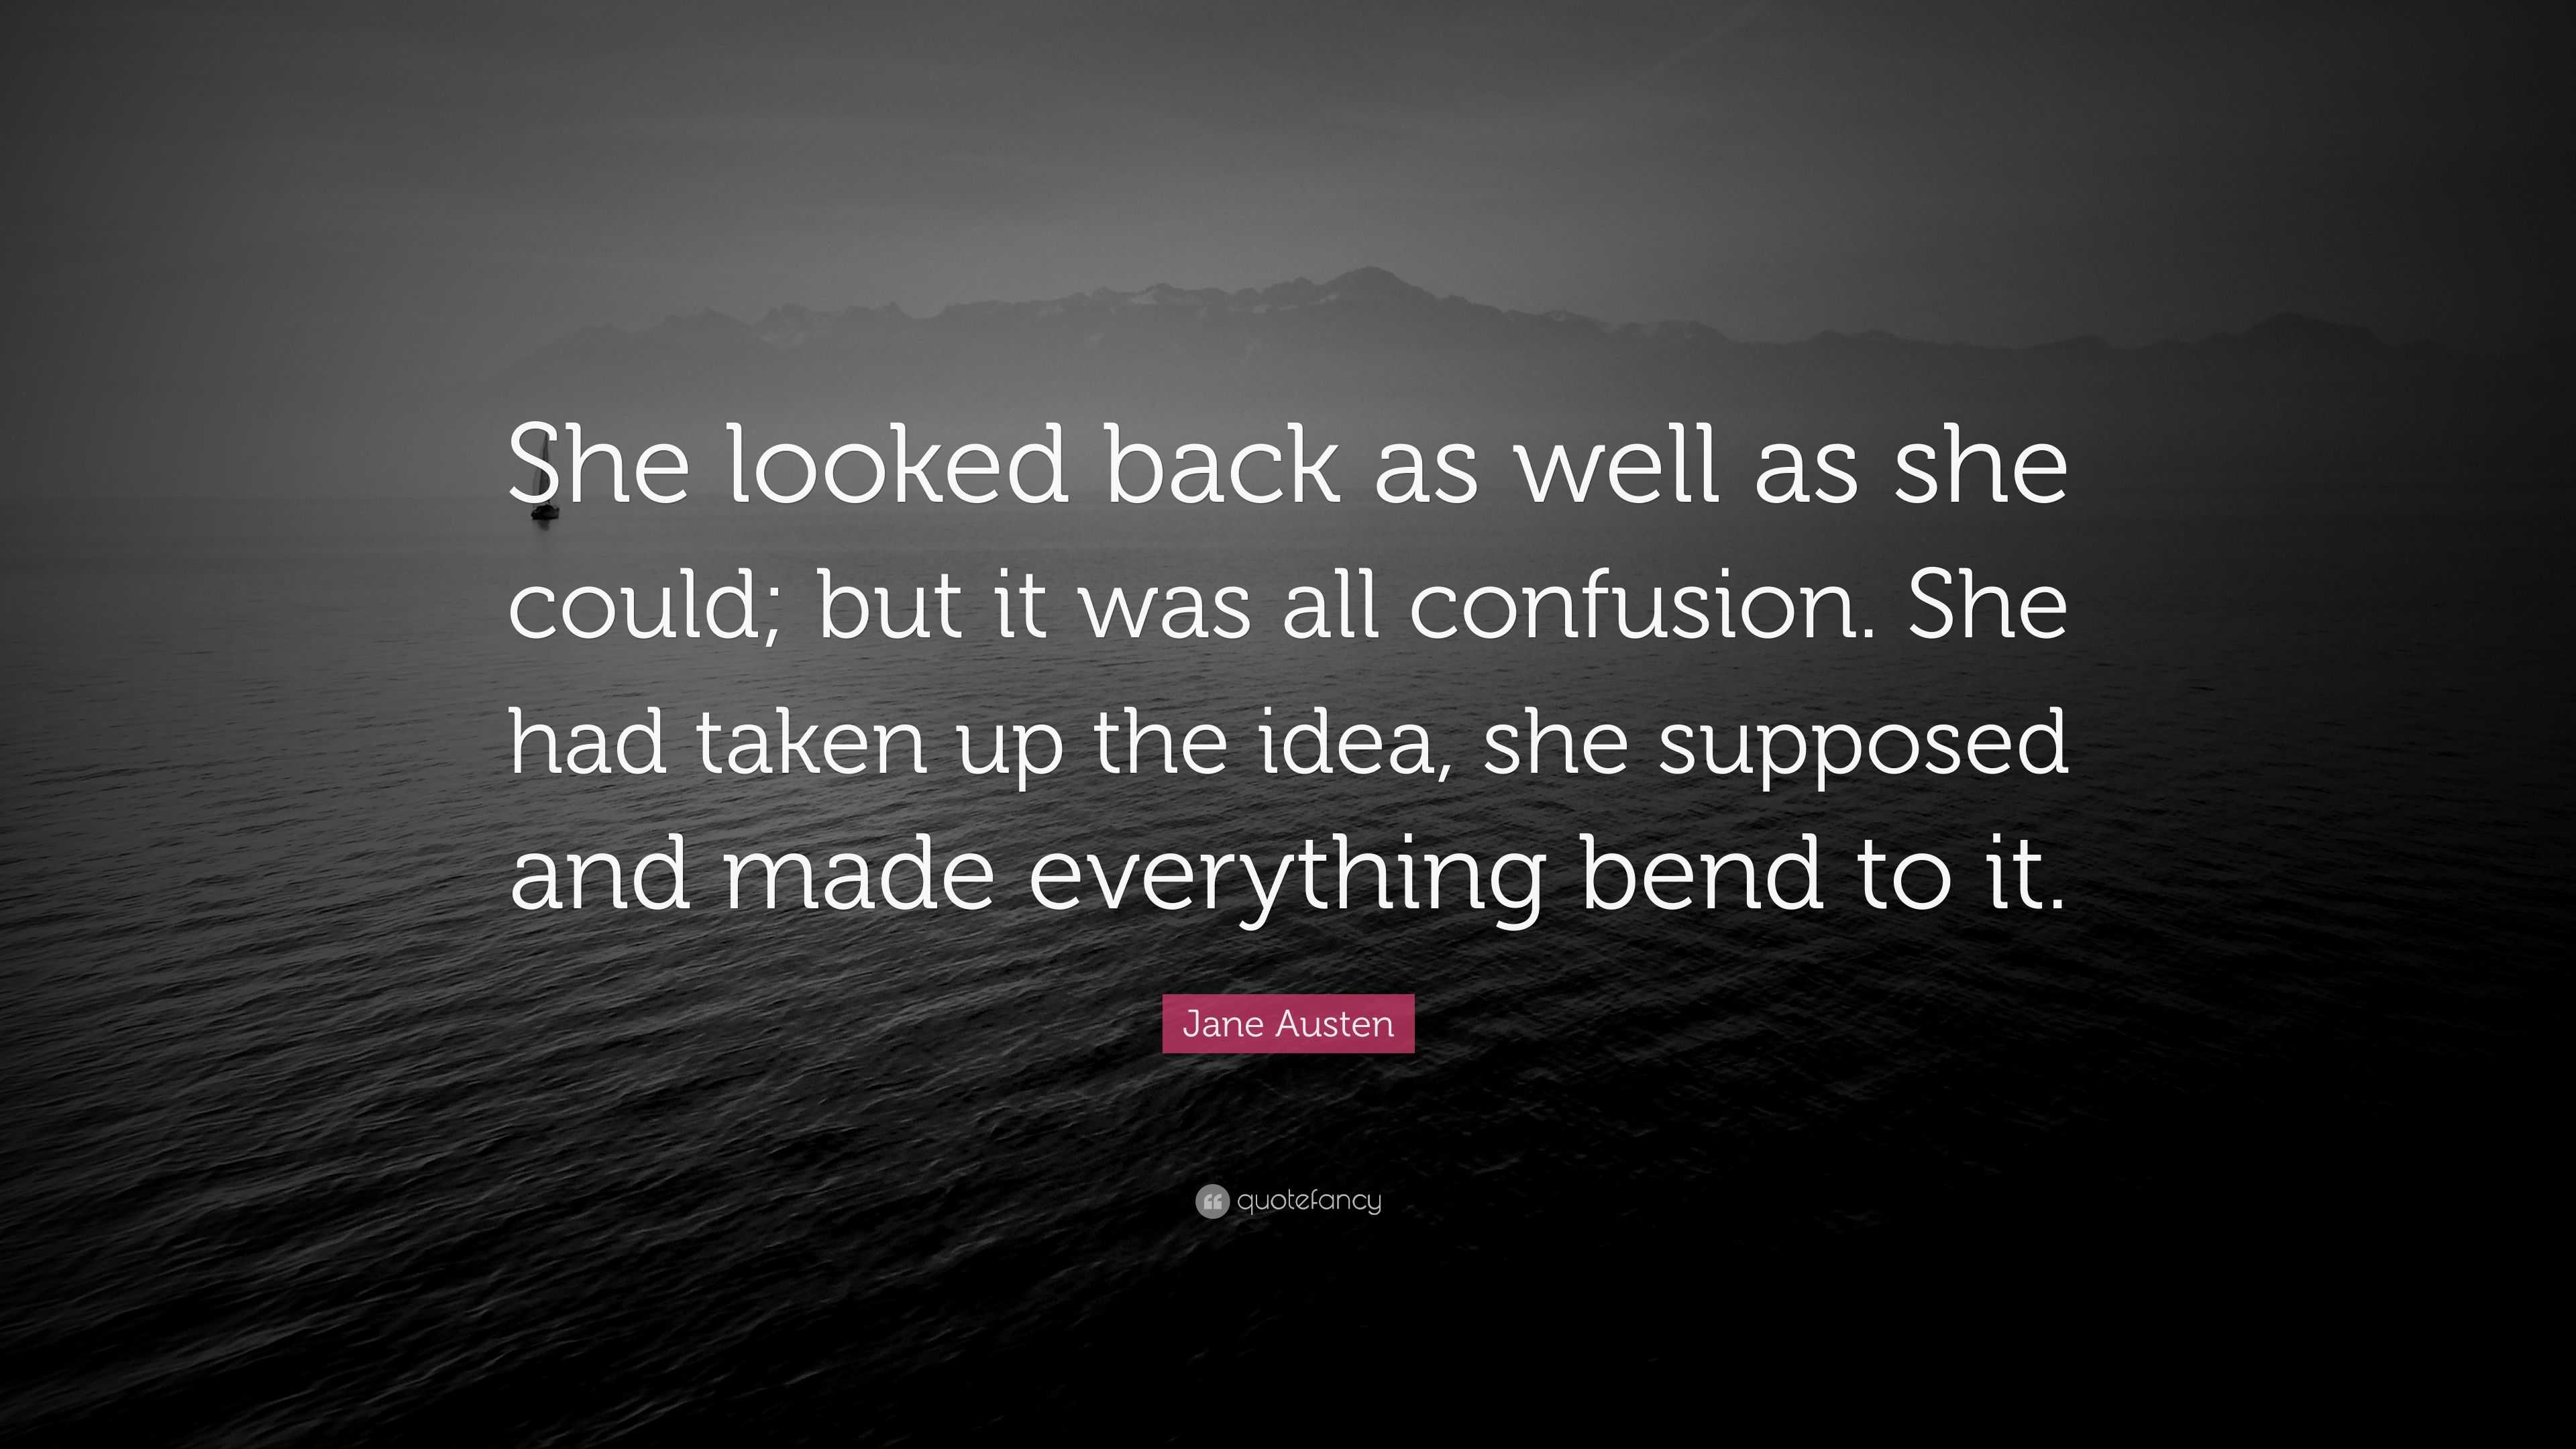 Jane Austen Quote: “She looked back as well as she could; but it was ...